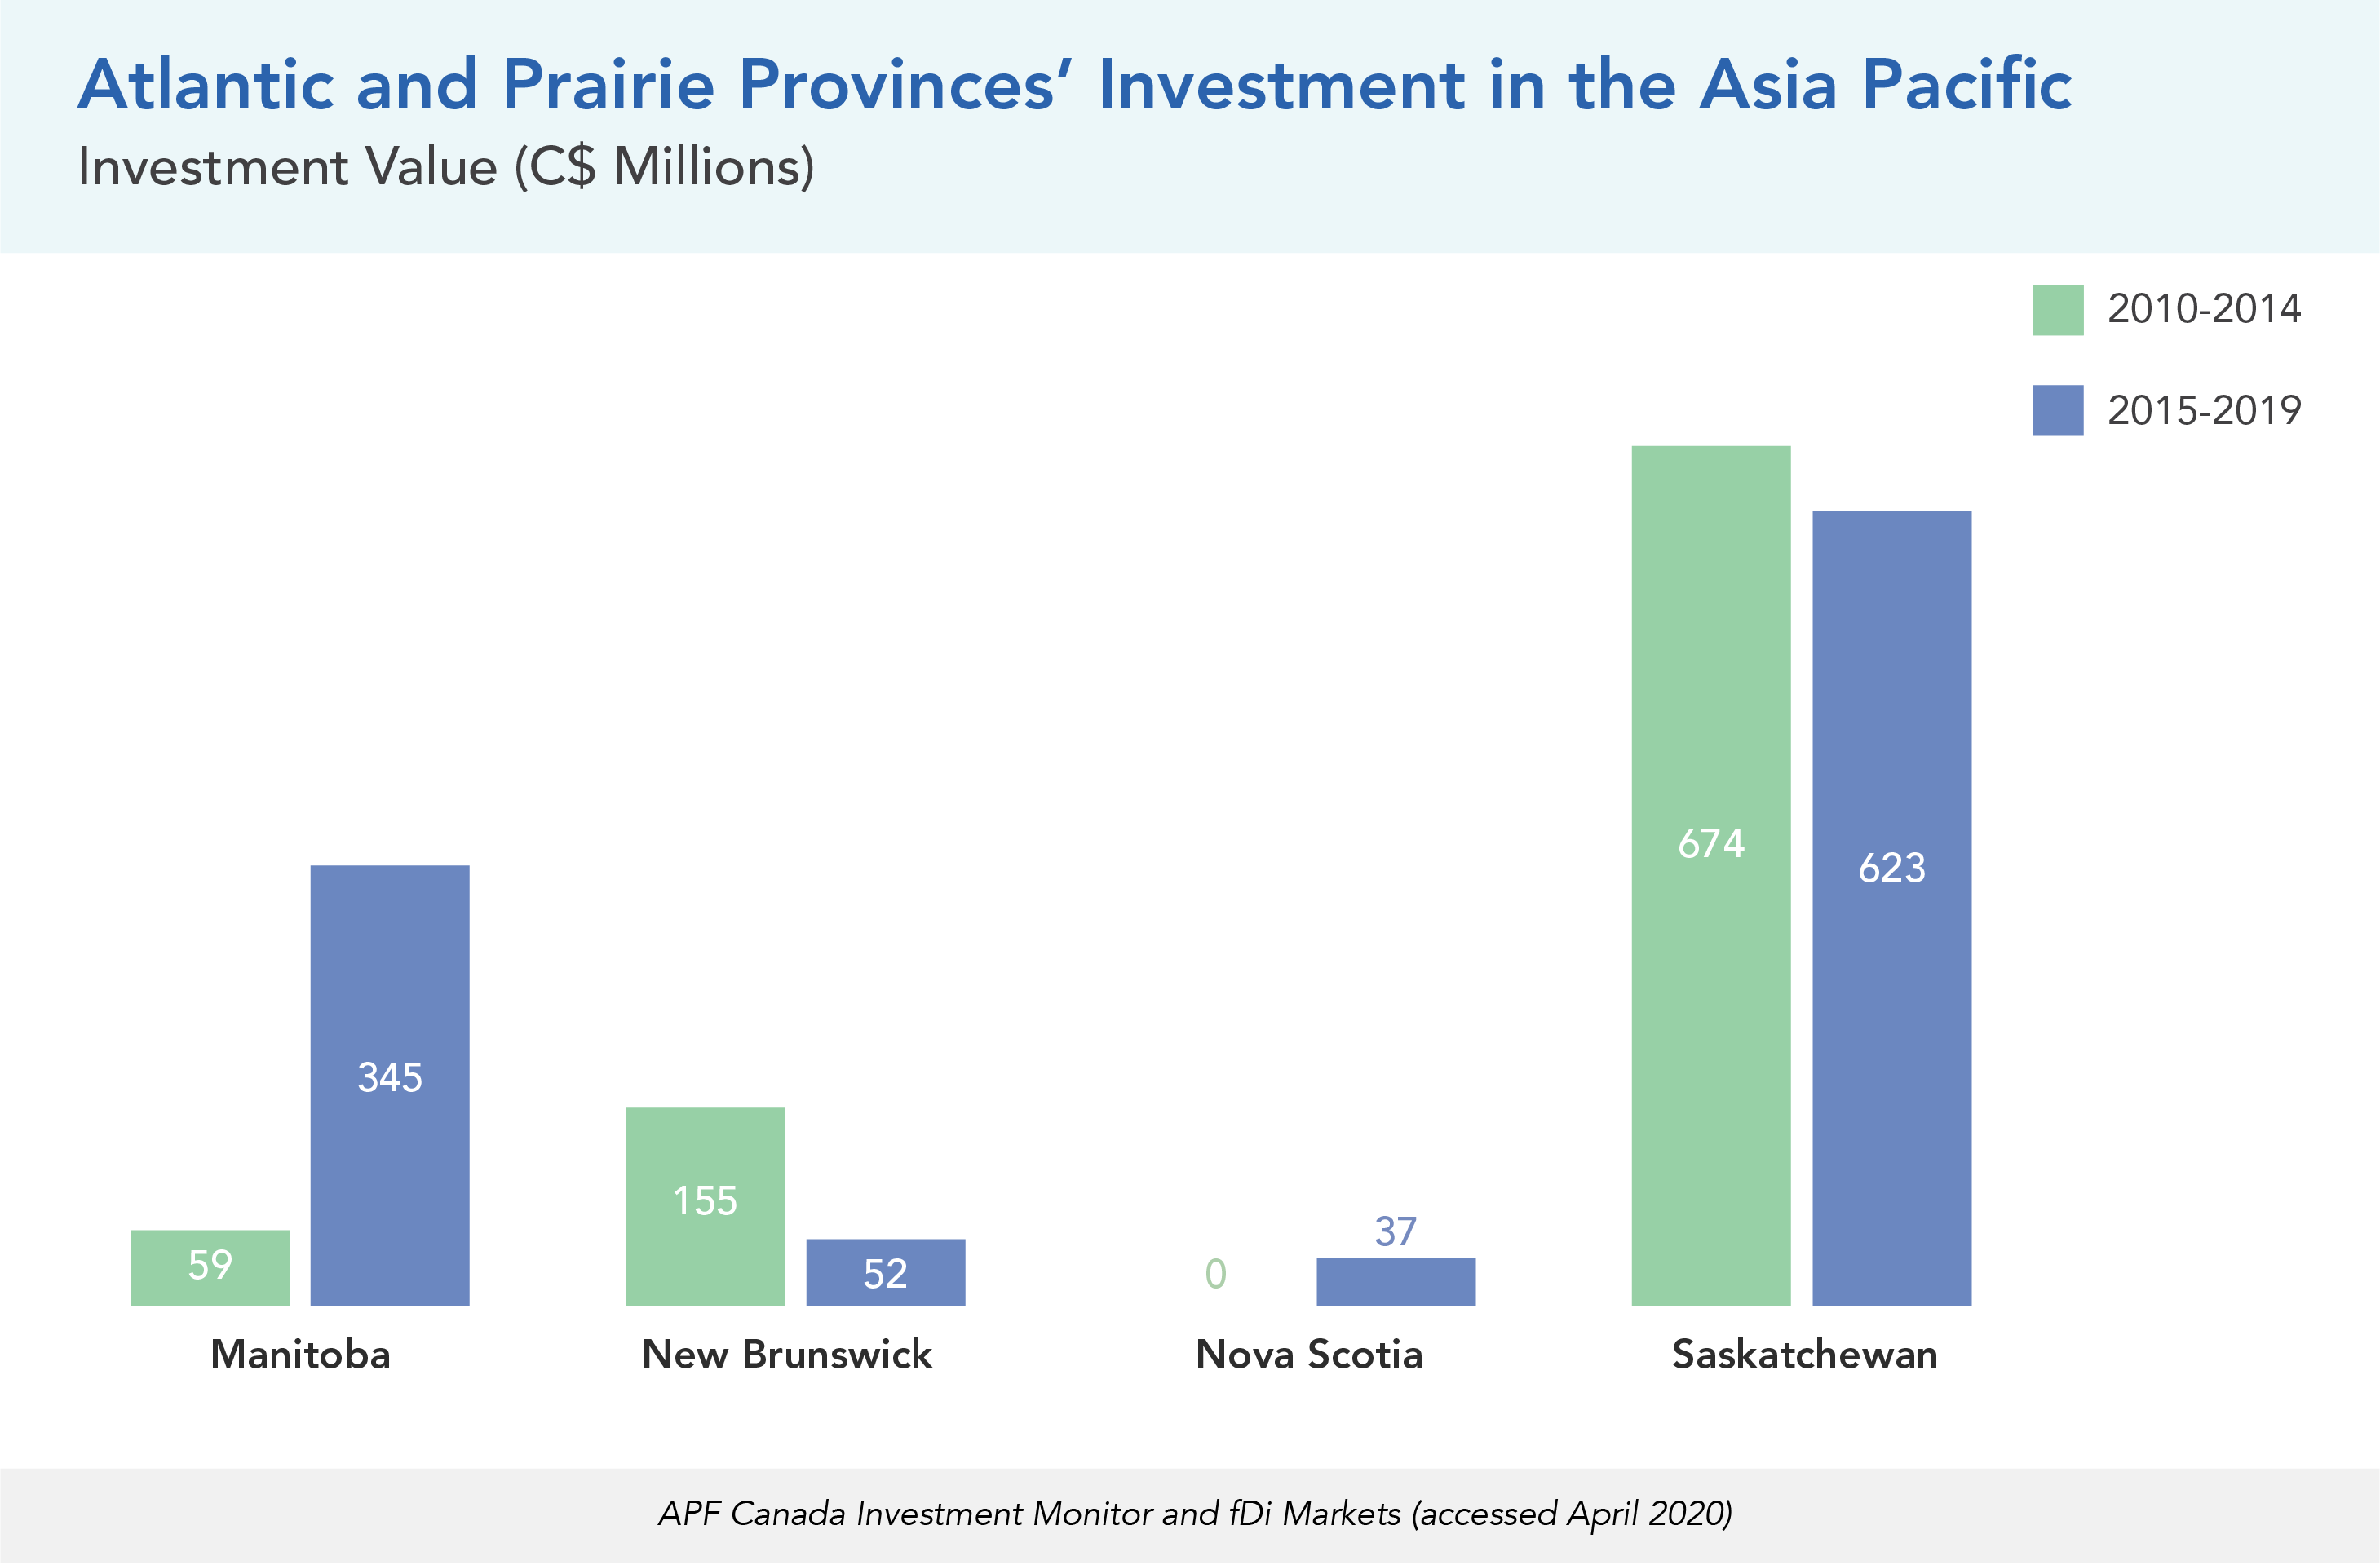 Atlantic and Prairie Provinces’ Investment in the Asia Pacific